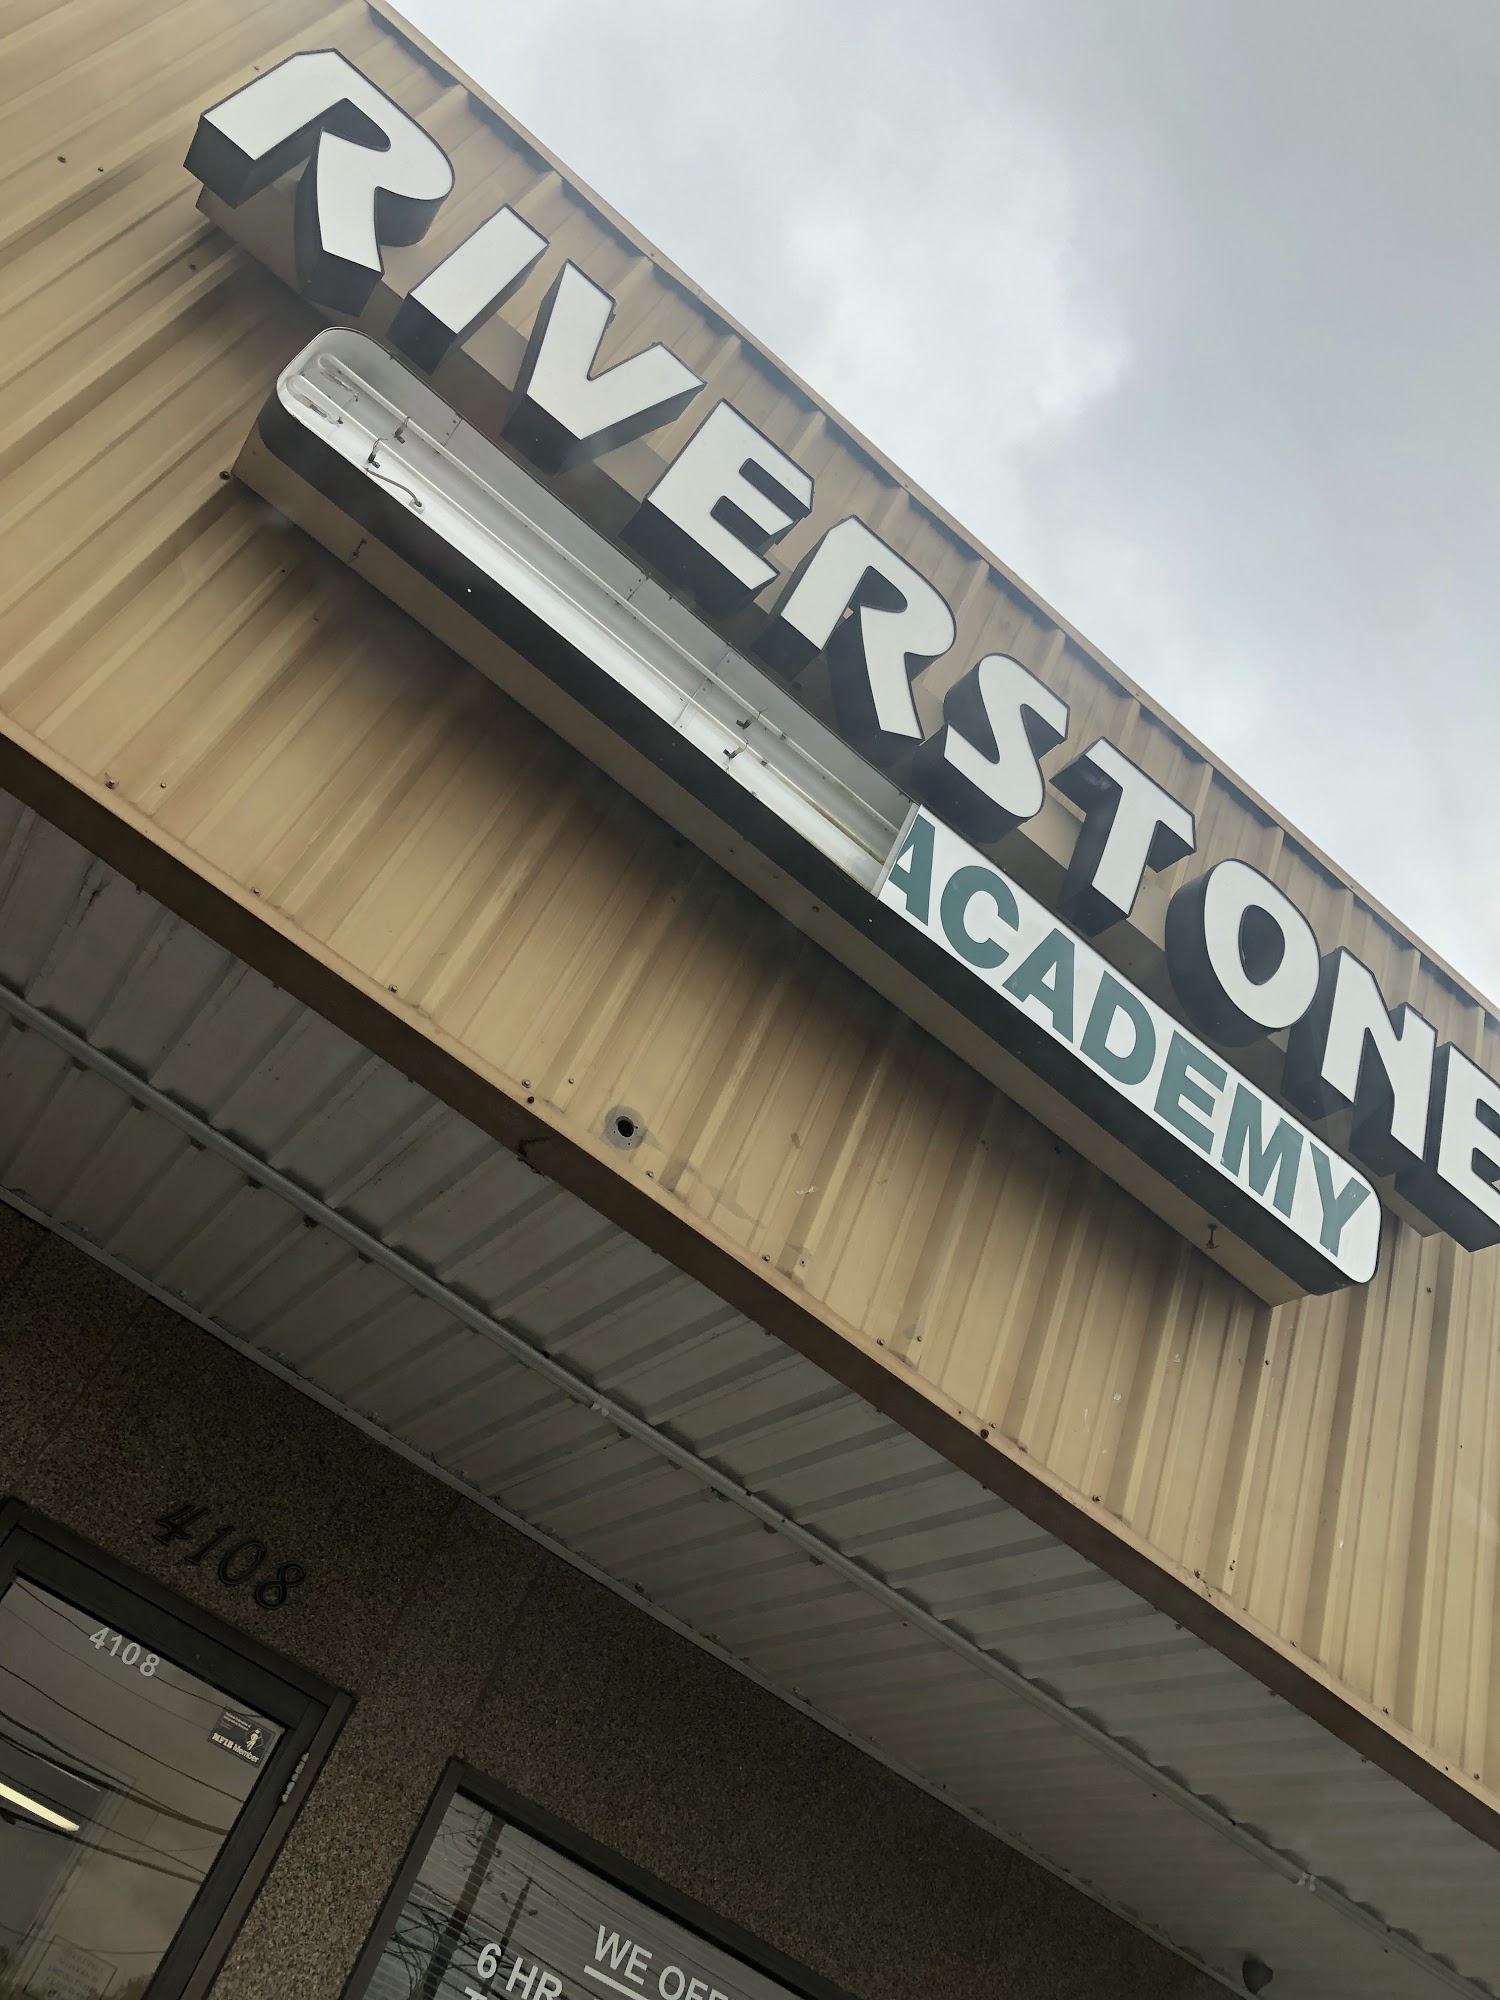 Riverstone Driving Academy